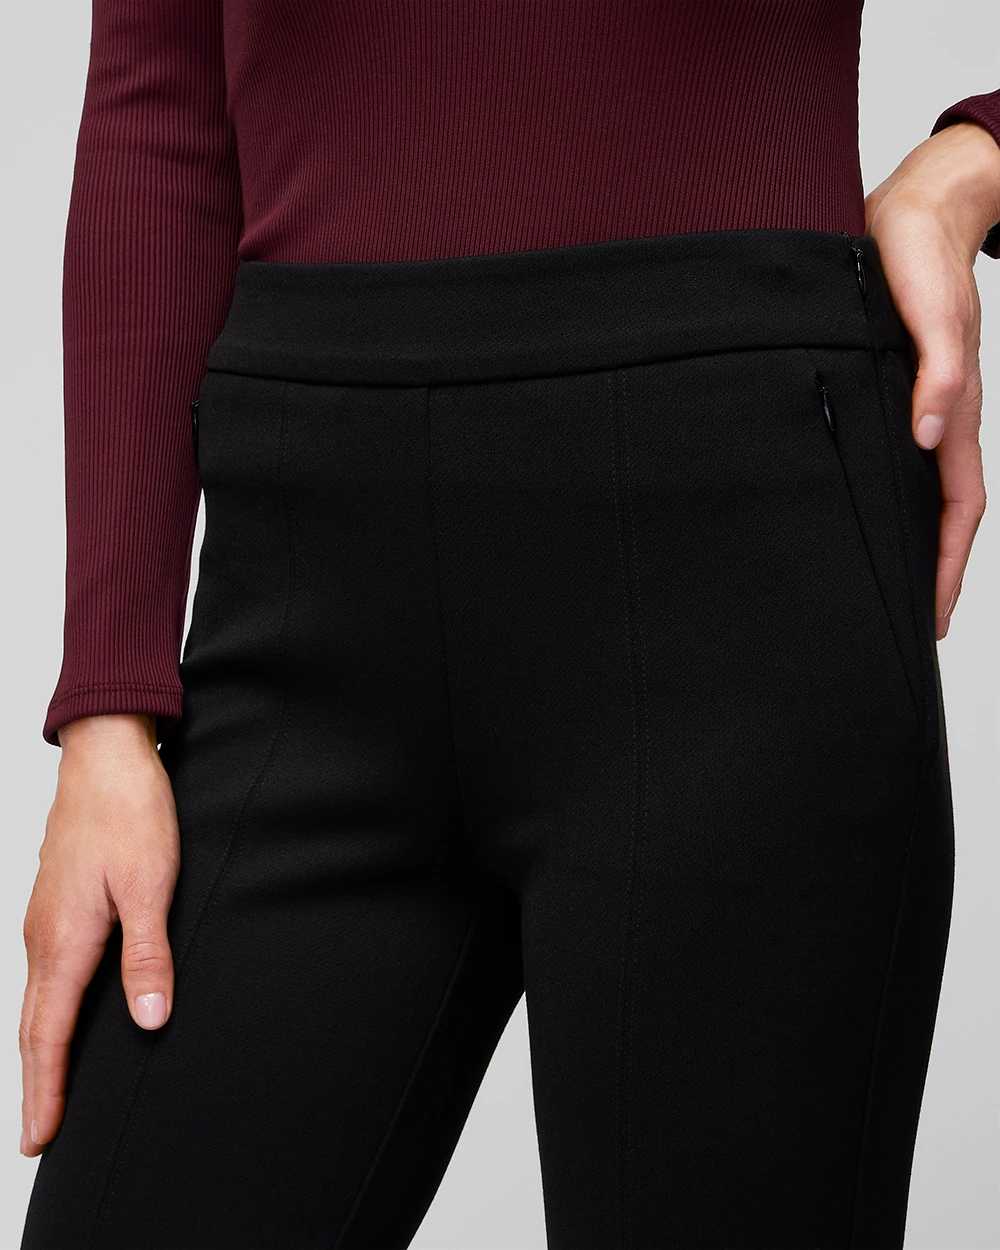 Petite Luxe Stretch Skinny Pant click to view larger image.